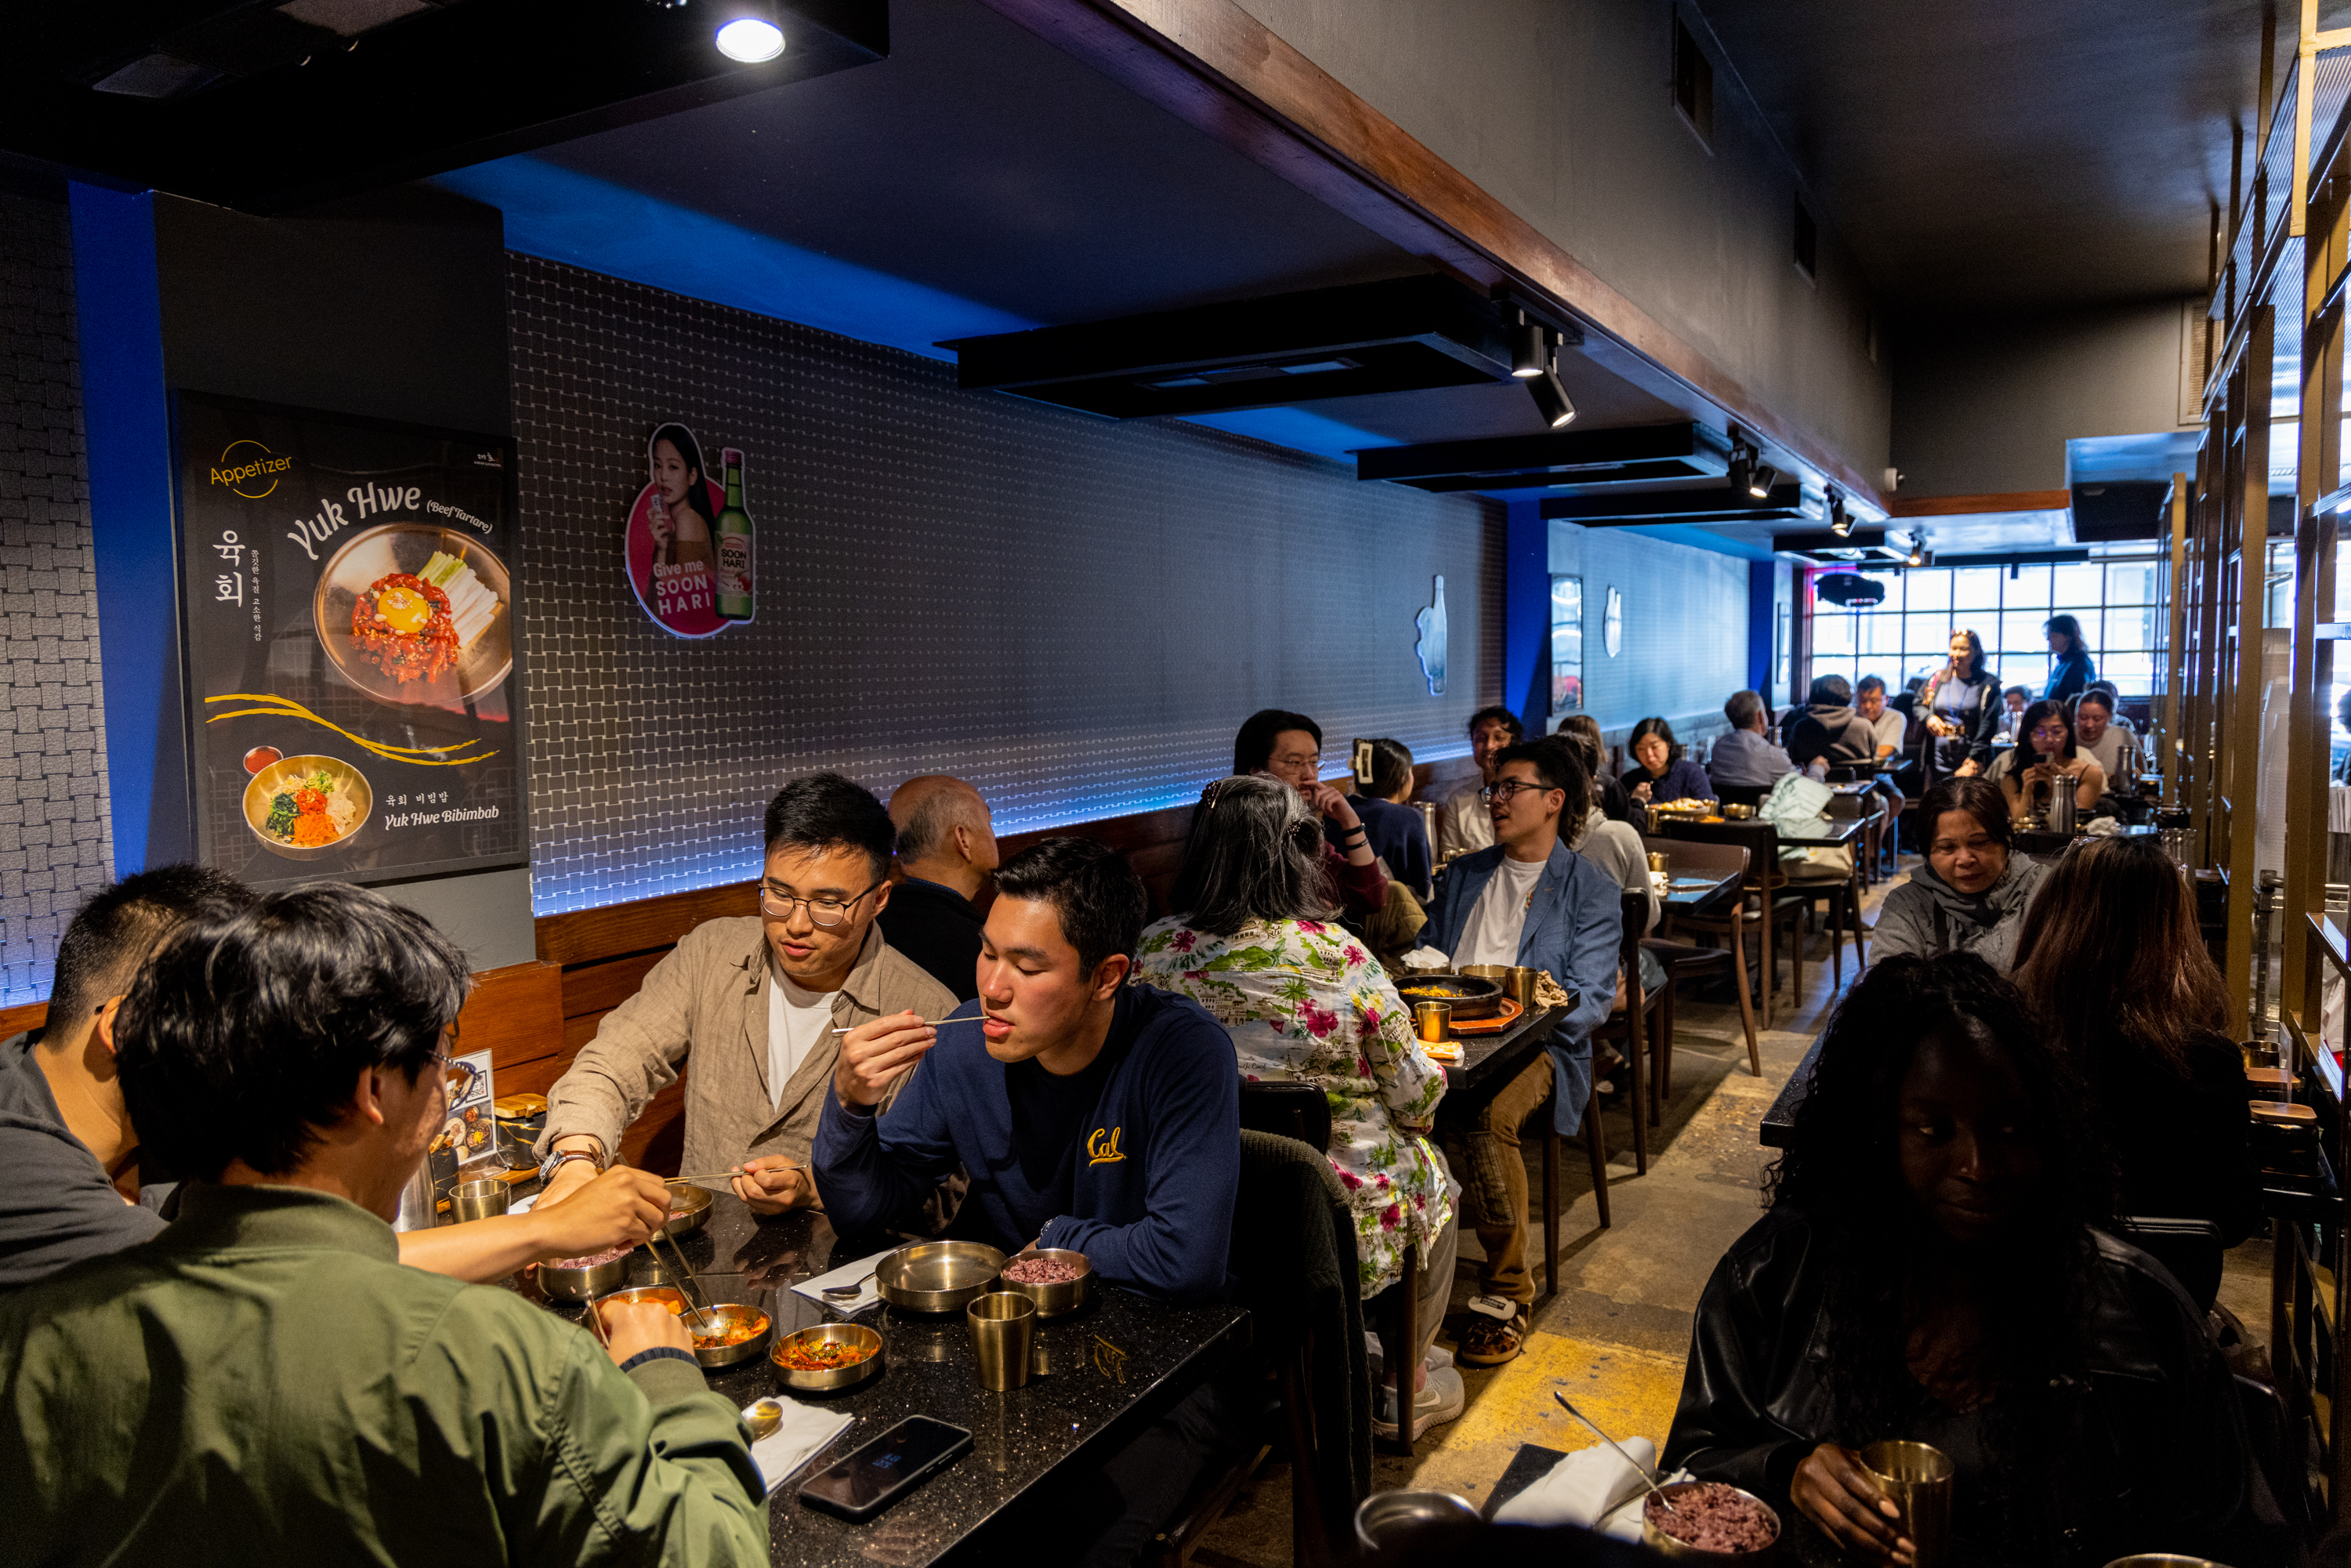 A bustling restaurant with closely packed tables shows diners enjoying their meals. The interior has dim lighting, with posters on the walls and a mix of people conversing.